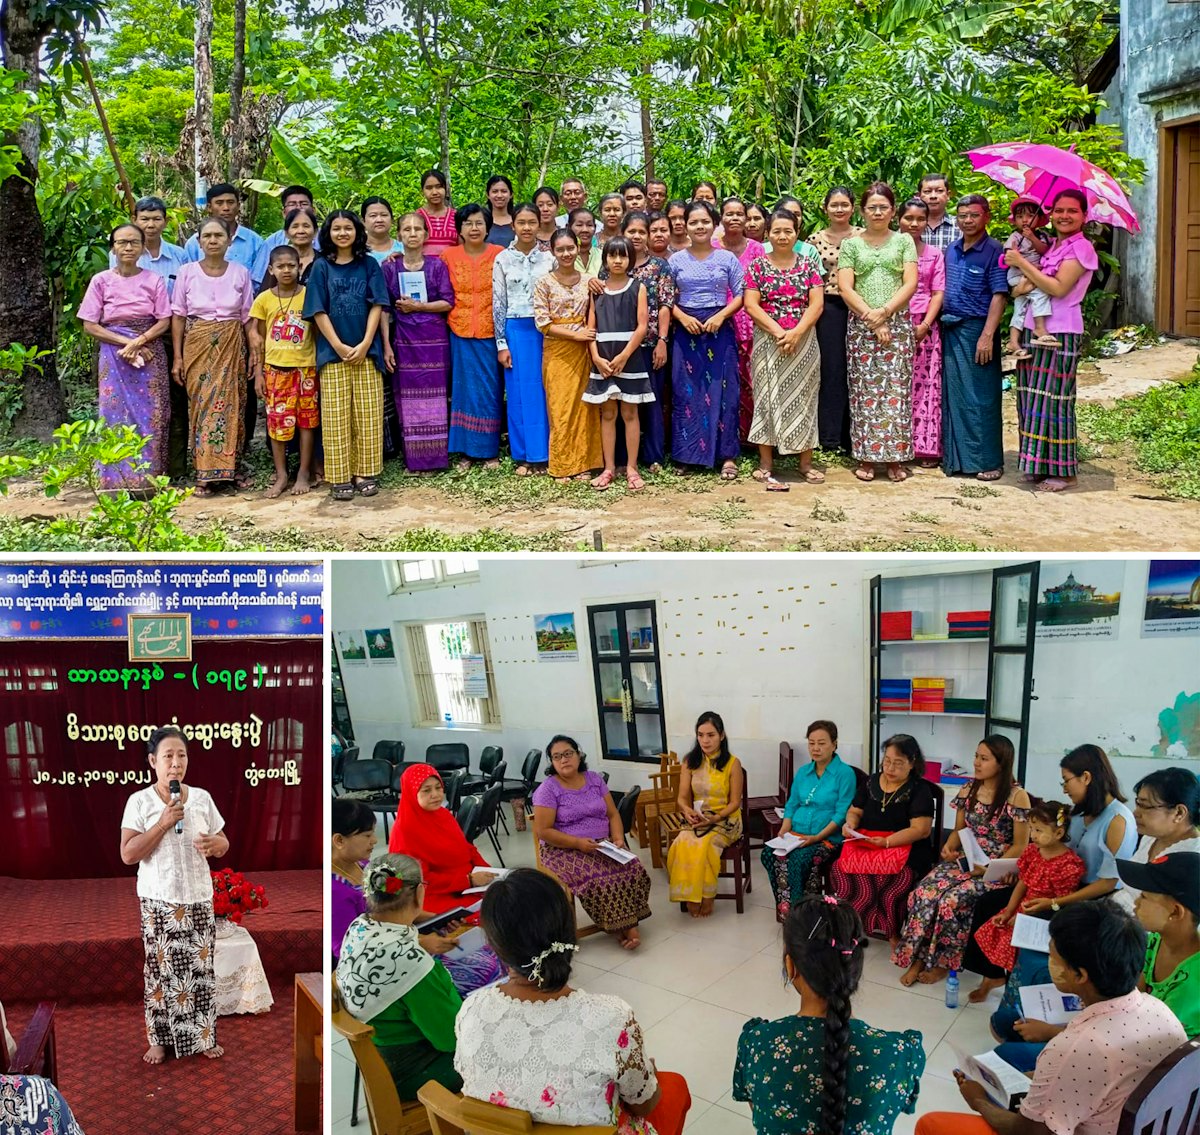 Pictured here are participants at a conference in Daidanaw, Myanmar.